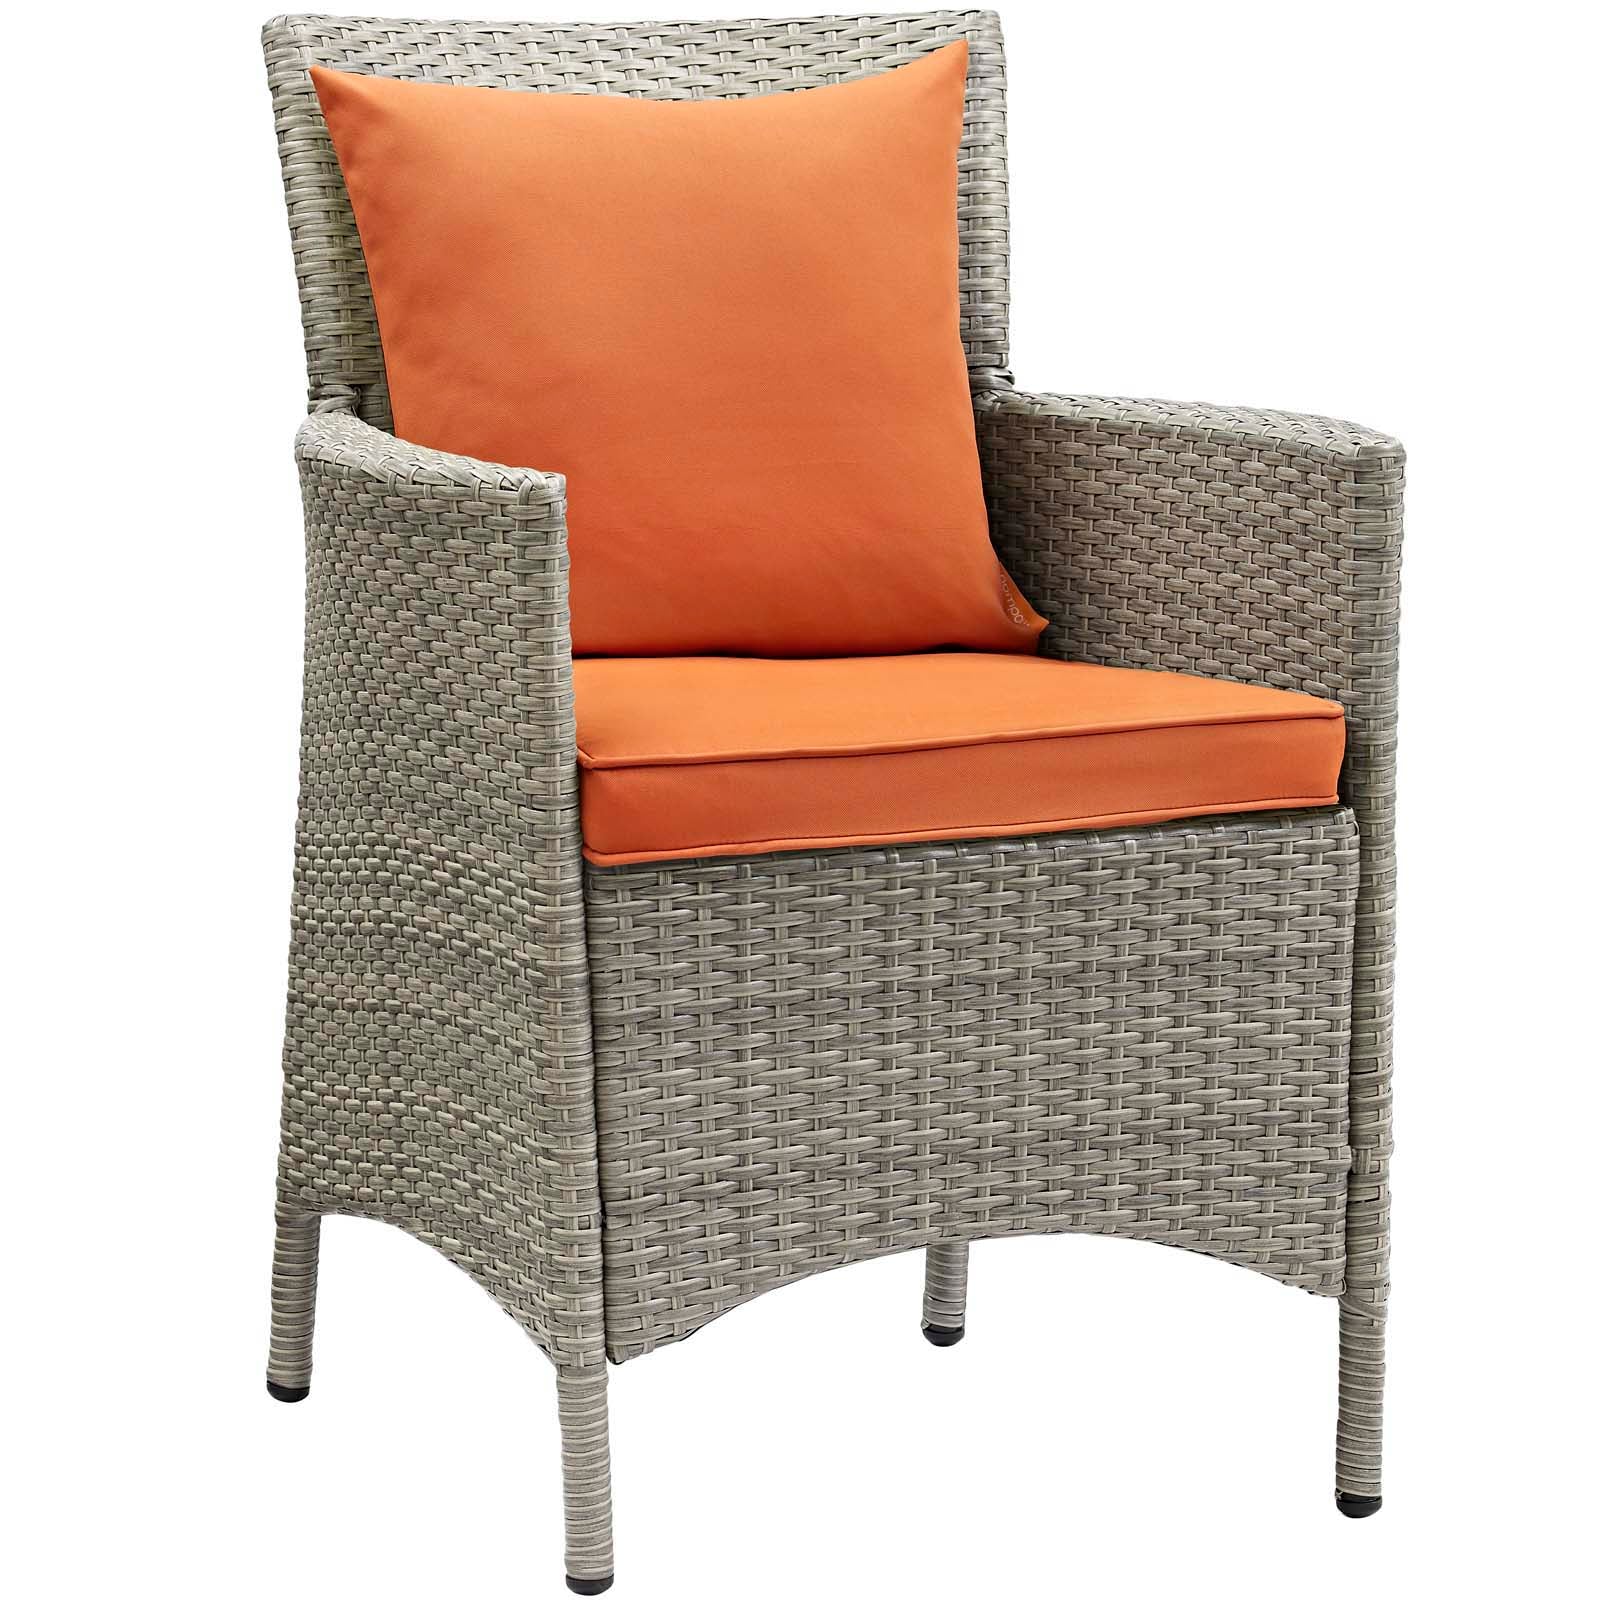 Modway Outdoor Dining Chairs - Conduit Outdoor Patio Wicker Rattan Dining Armchair Set of 2 Light Gray Orange